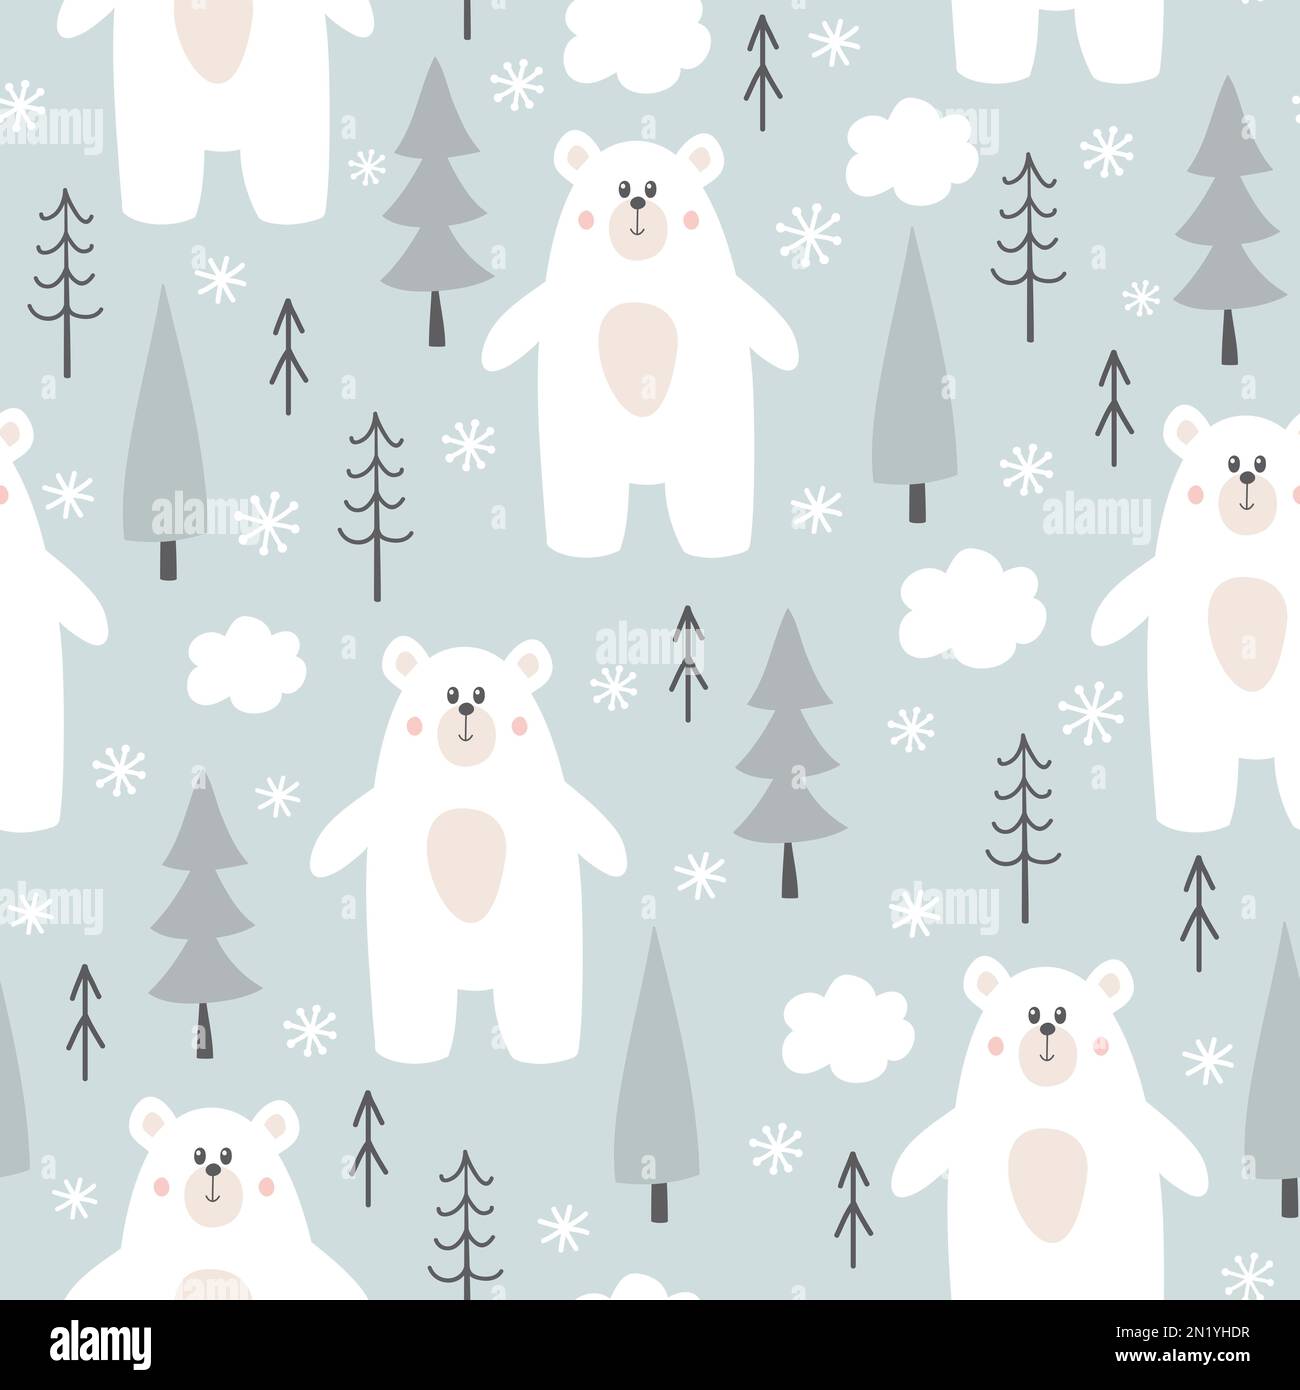 Winter seamless pattern with cute polar bear, trees and snowflakes. Stock Photo